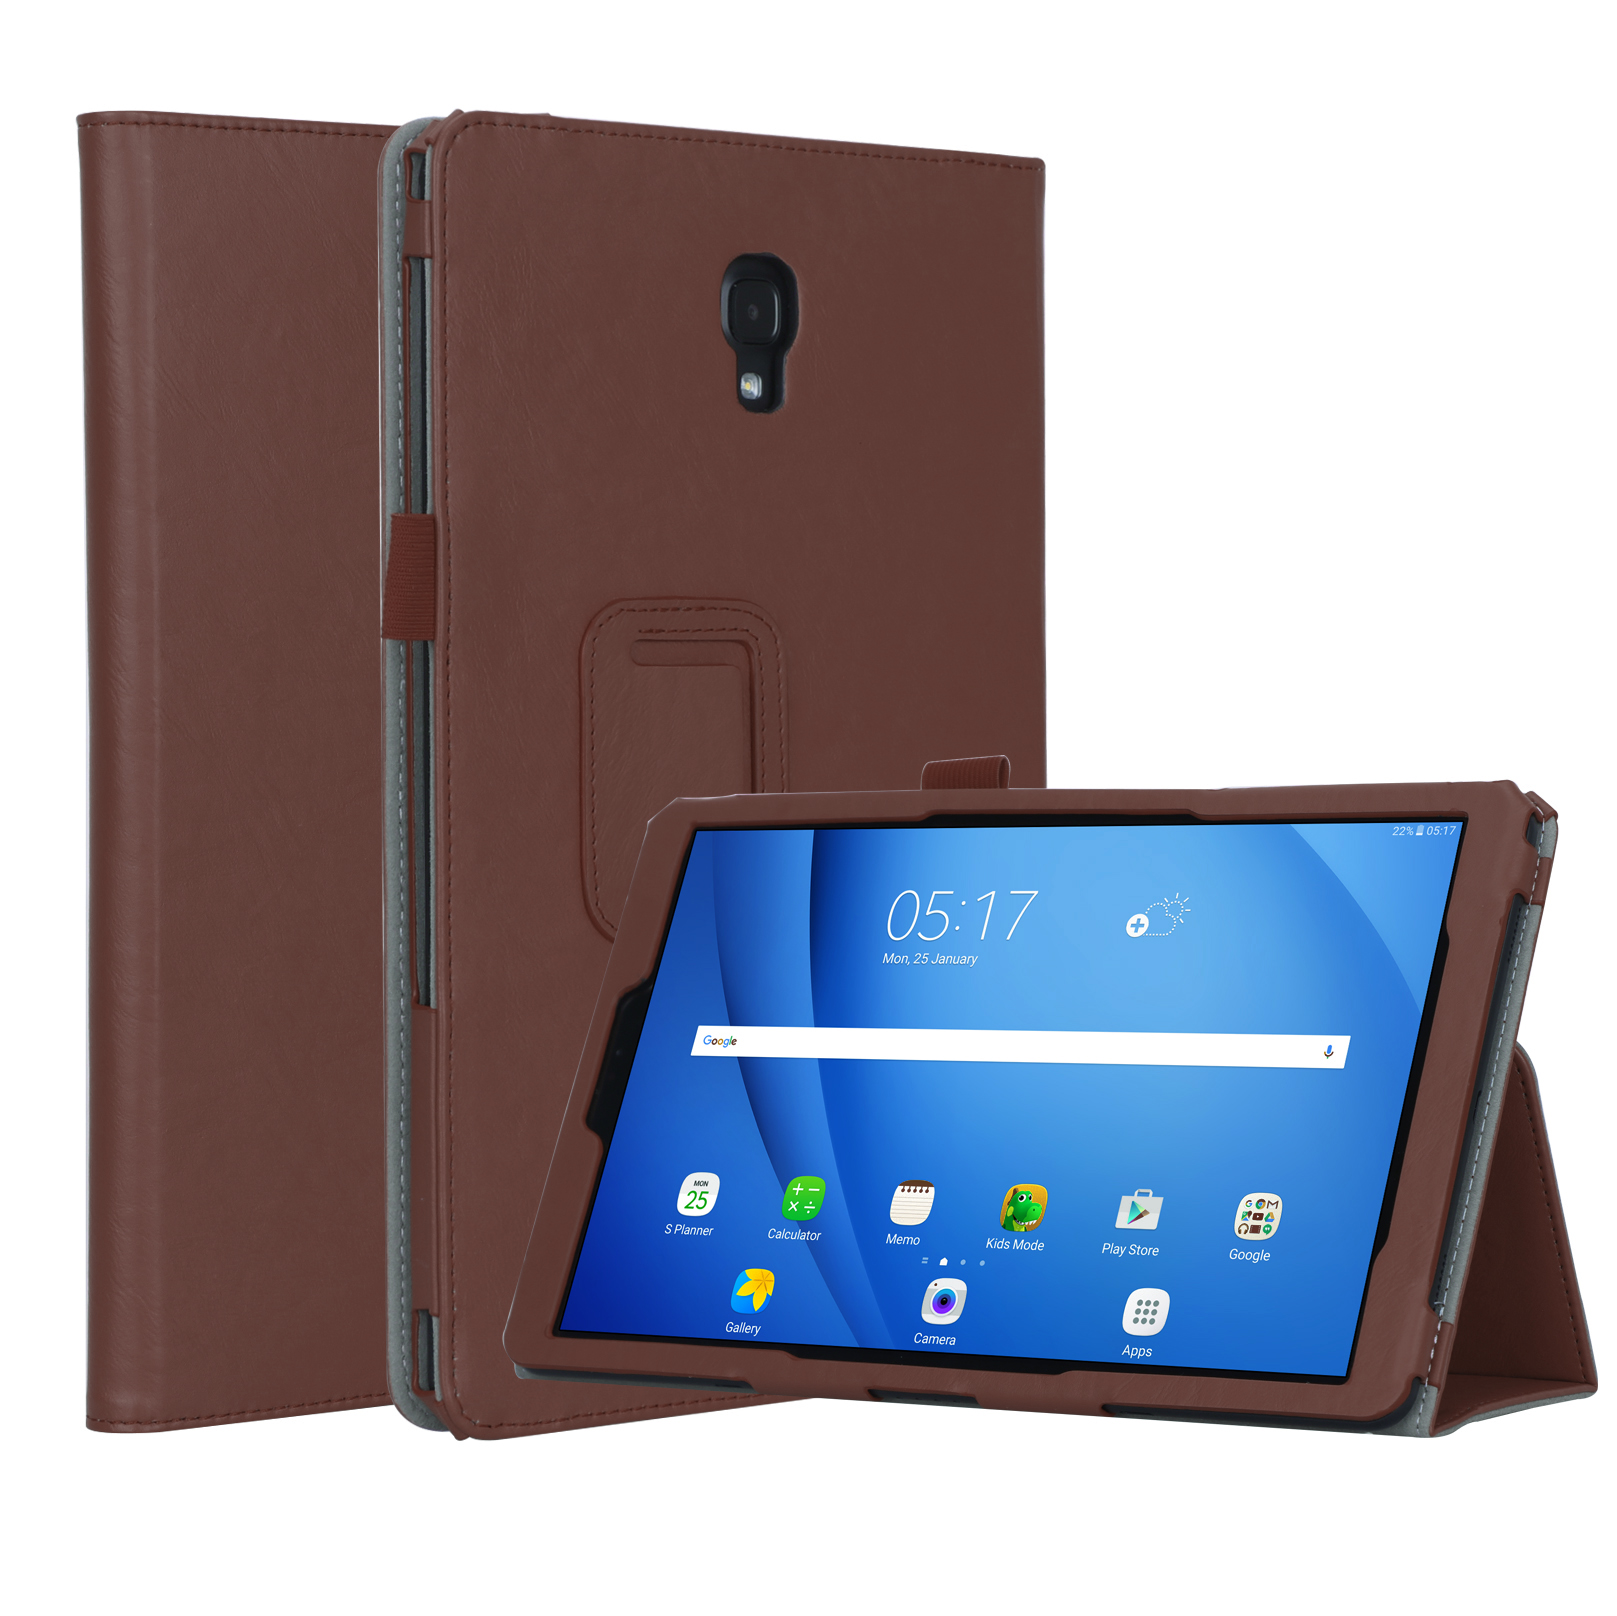 For Samsung tab A2 T590/T595 10.5 inch PU Leather Protective Case with Hand Support Card Slot Sleep Function brown_Samsung tab A2 T590/T595 10.5 inch